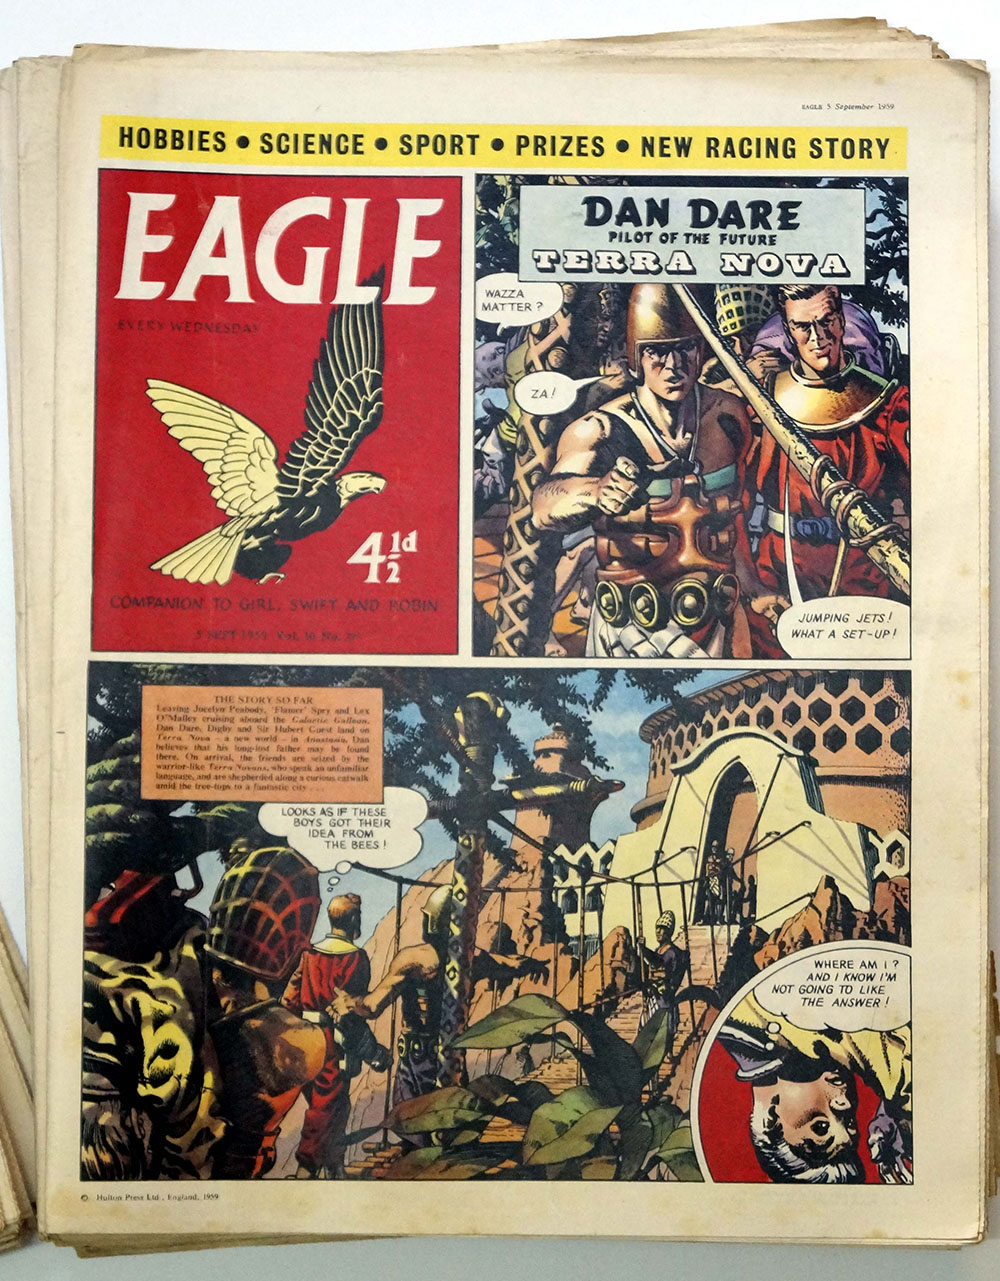 Eagle Volume 10 issues 1 – 45 (1959) VFN art by EAGLE Rare Comics at The Illustration Art Gallery